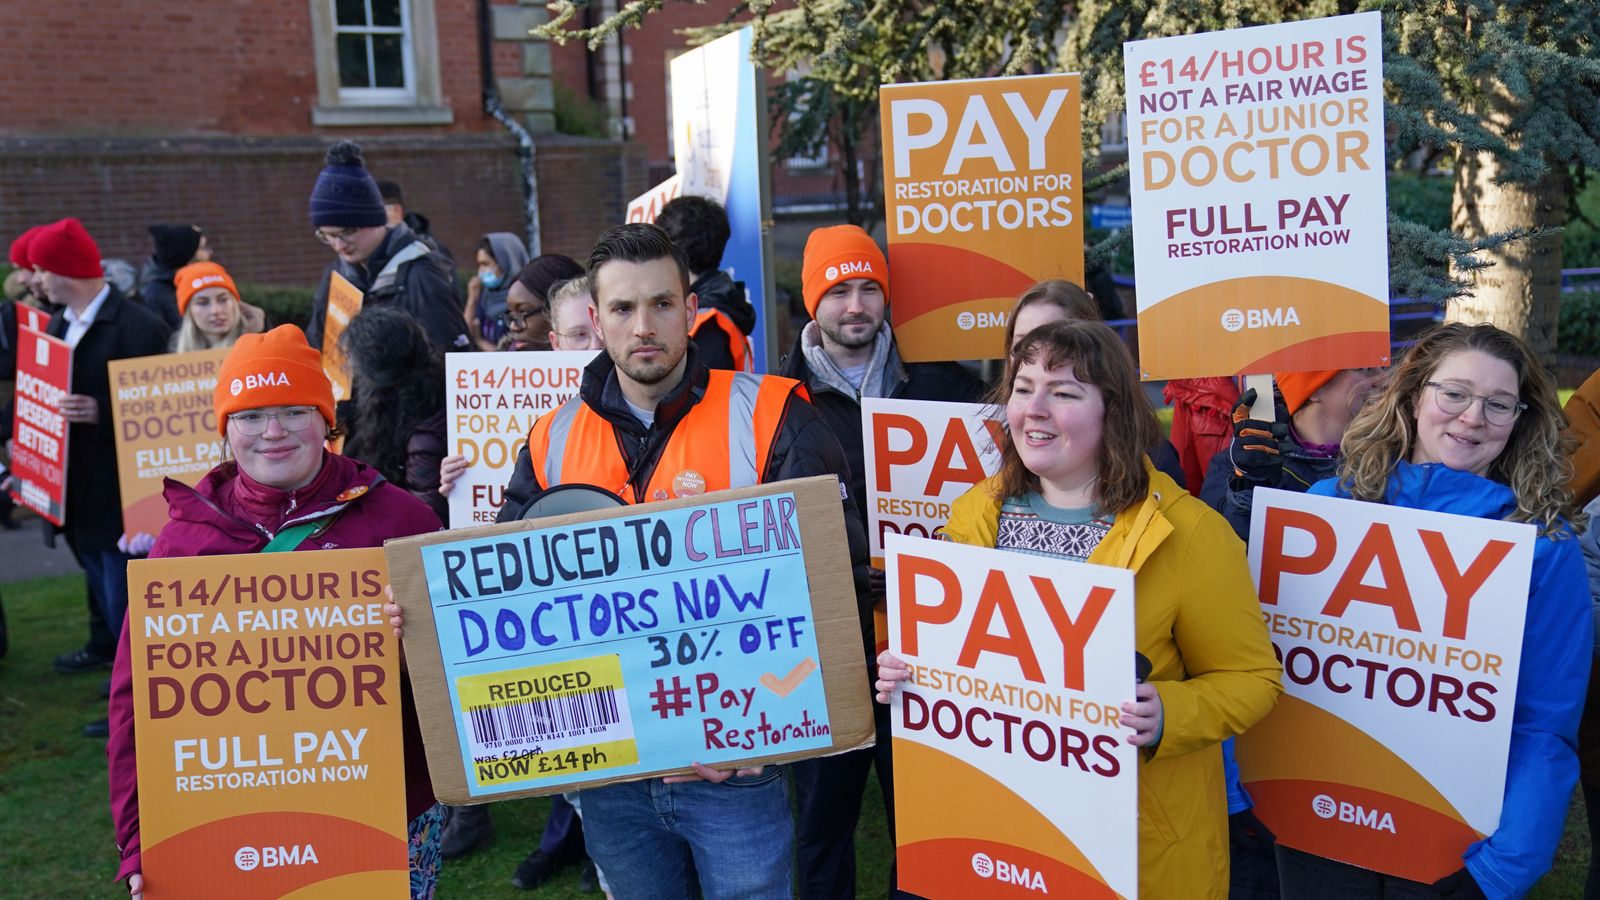 Junior doctors are going on their longest-ever strike in an aim 'to save NHS', says BMA chief